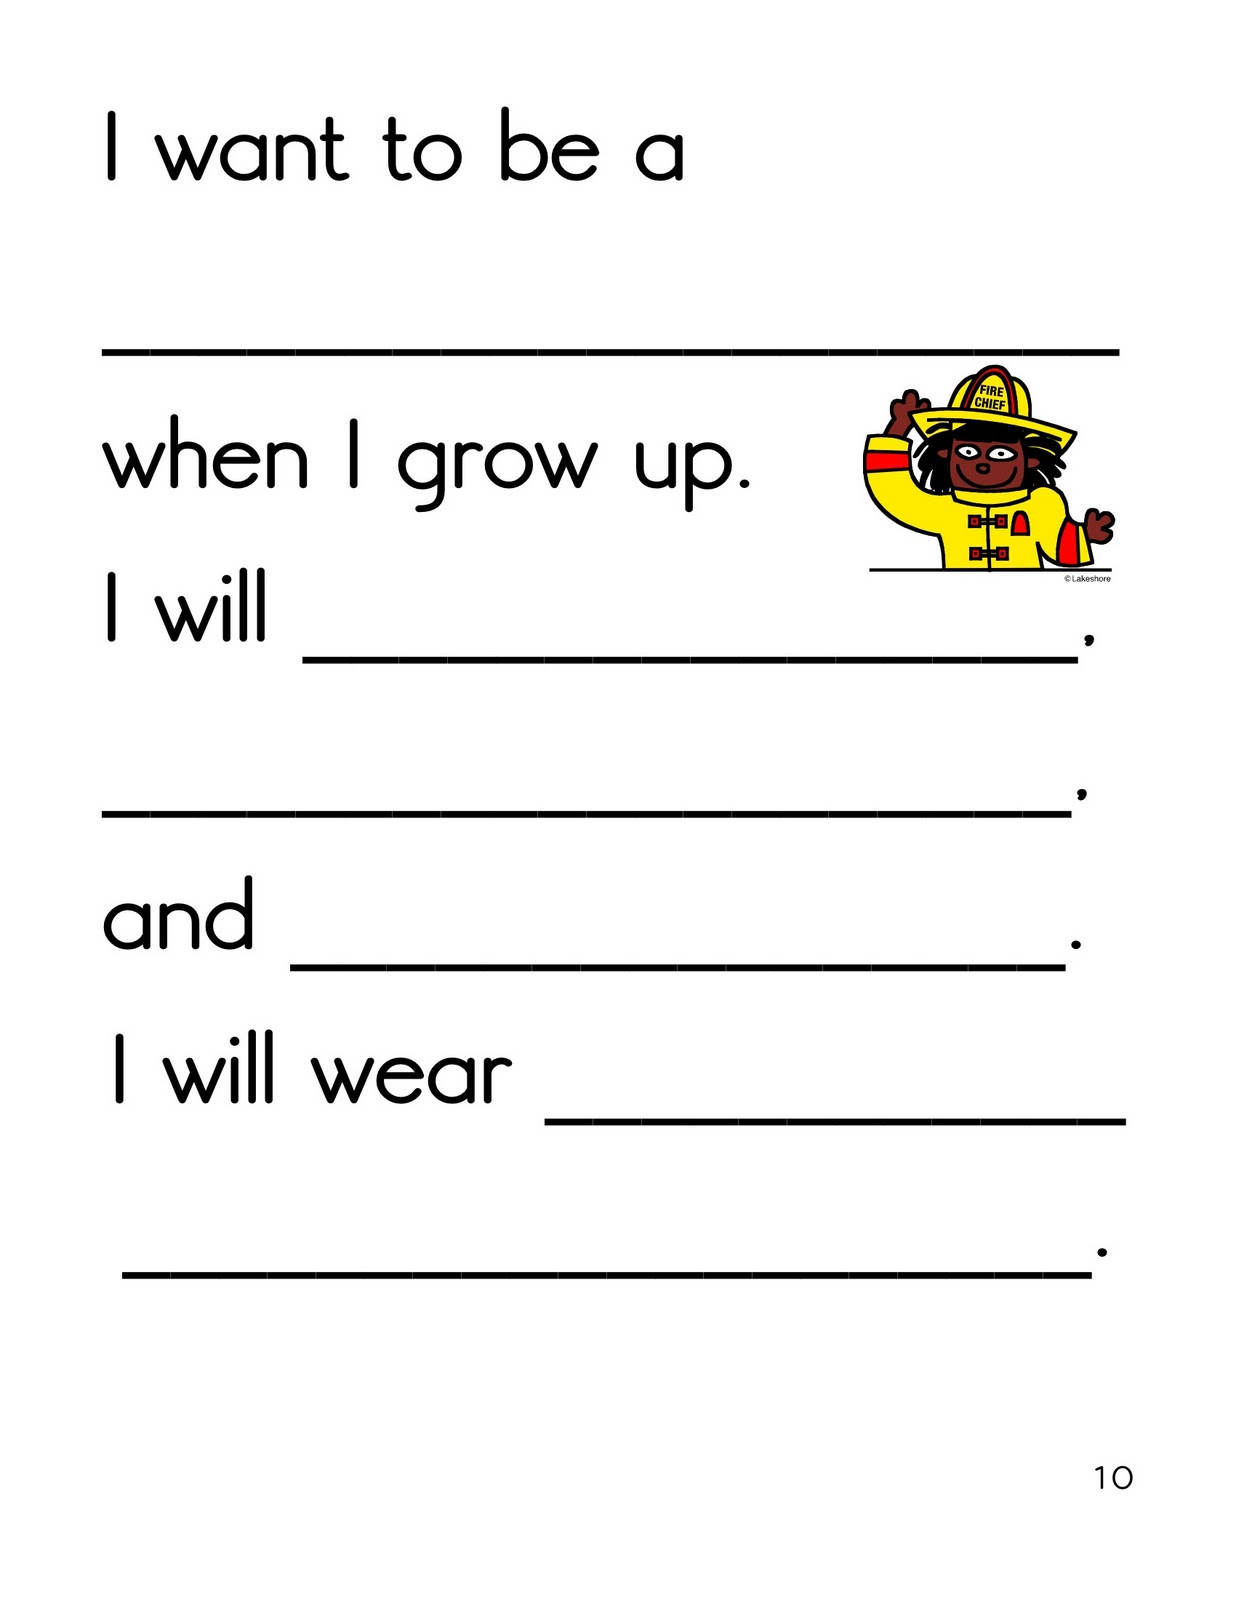 Ms. Carlie's Little Learners Preschool {all about me} and {QOTW}